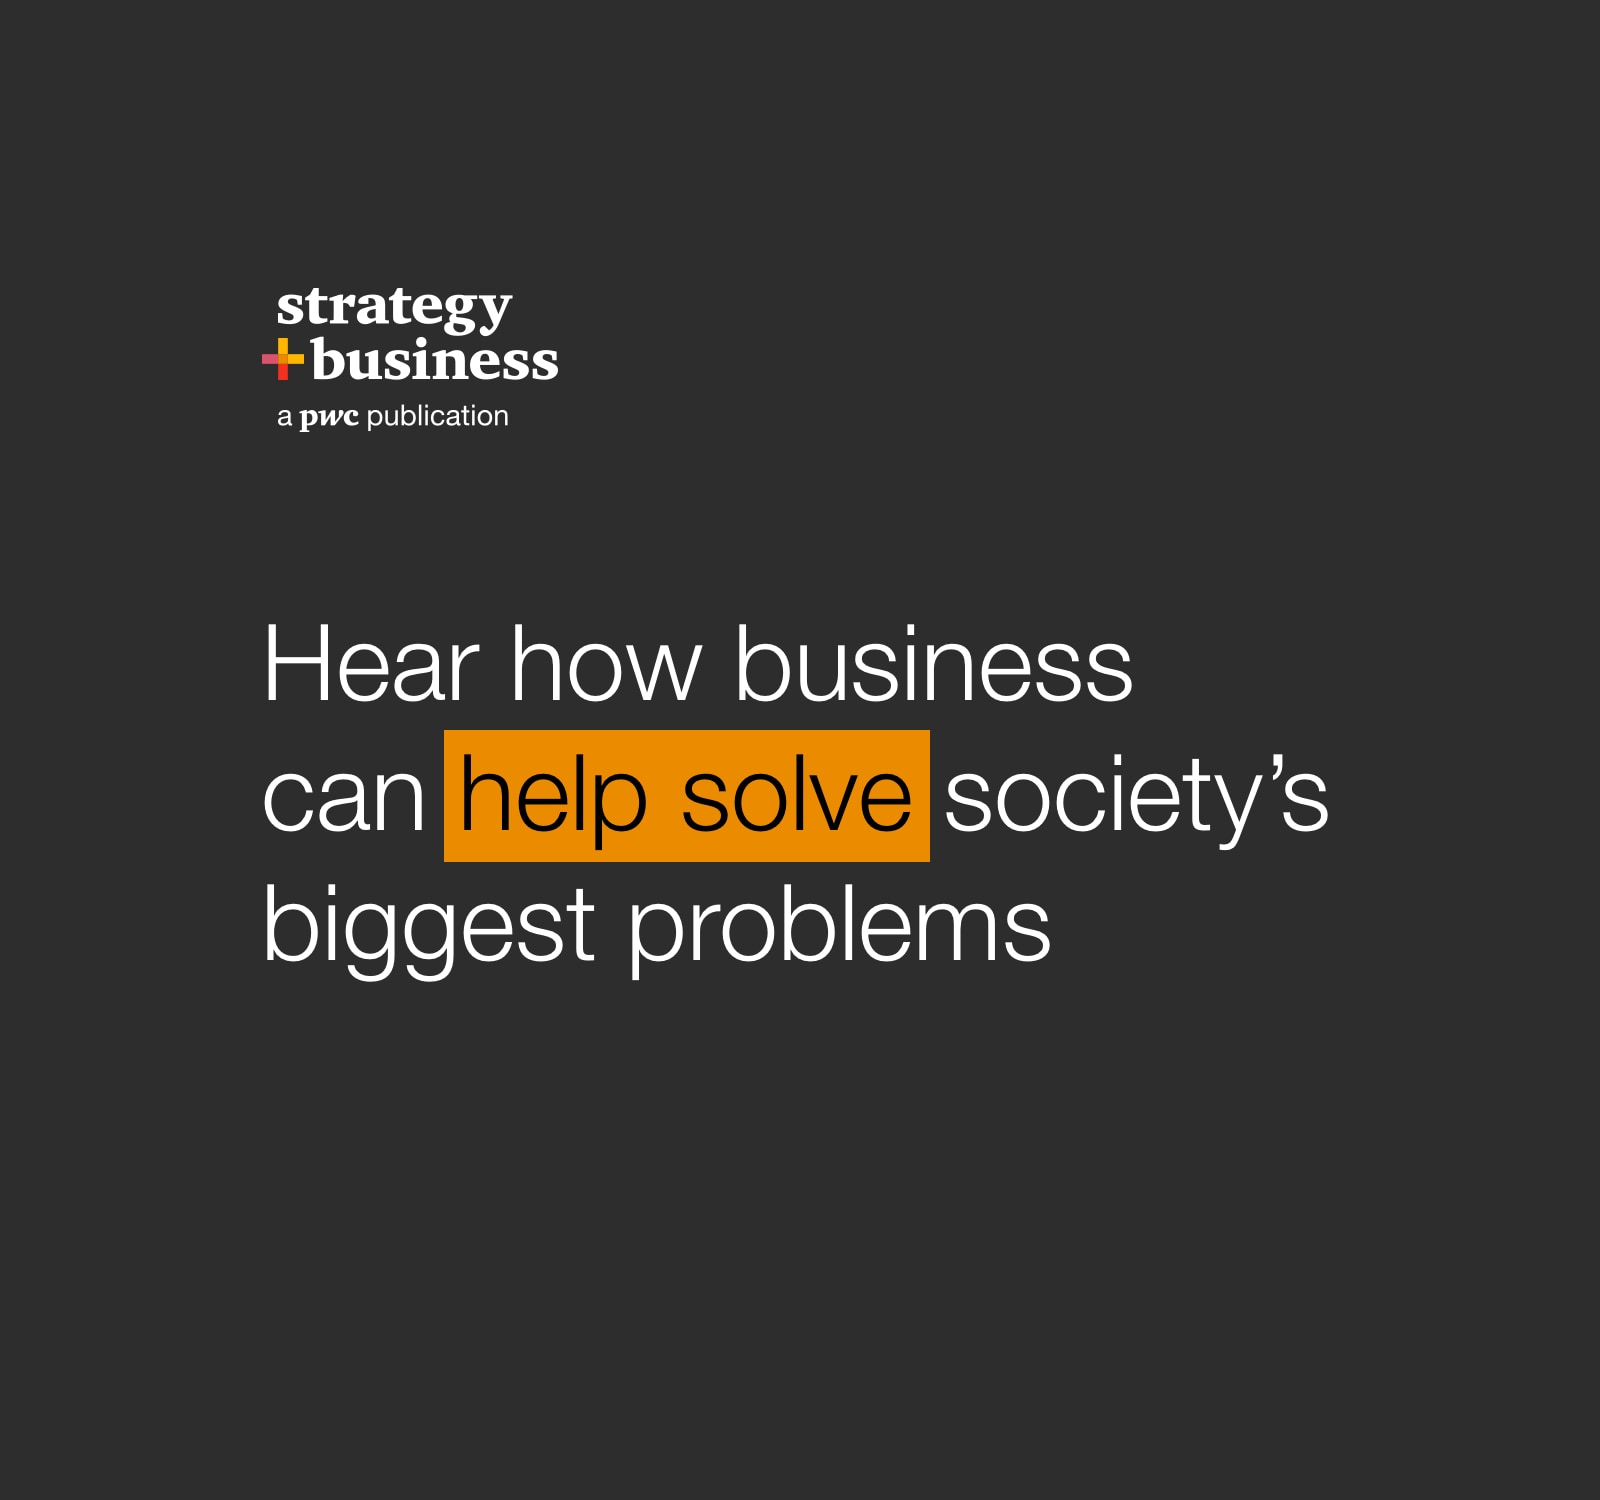 Hear how business can help solve society’s biggest problems